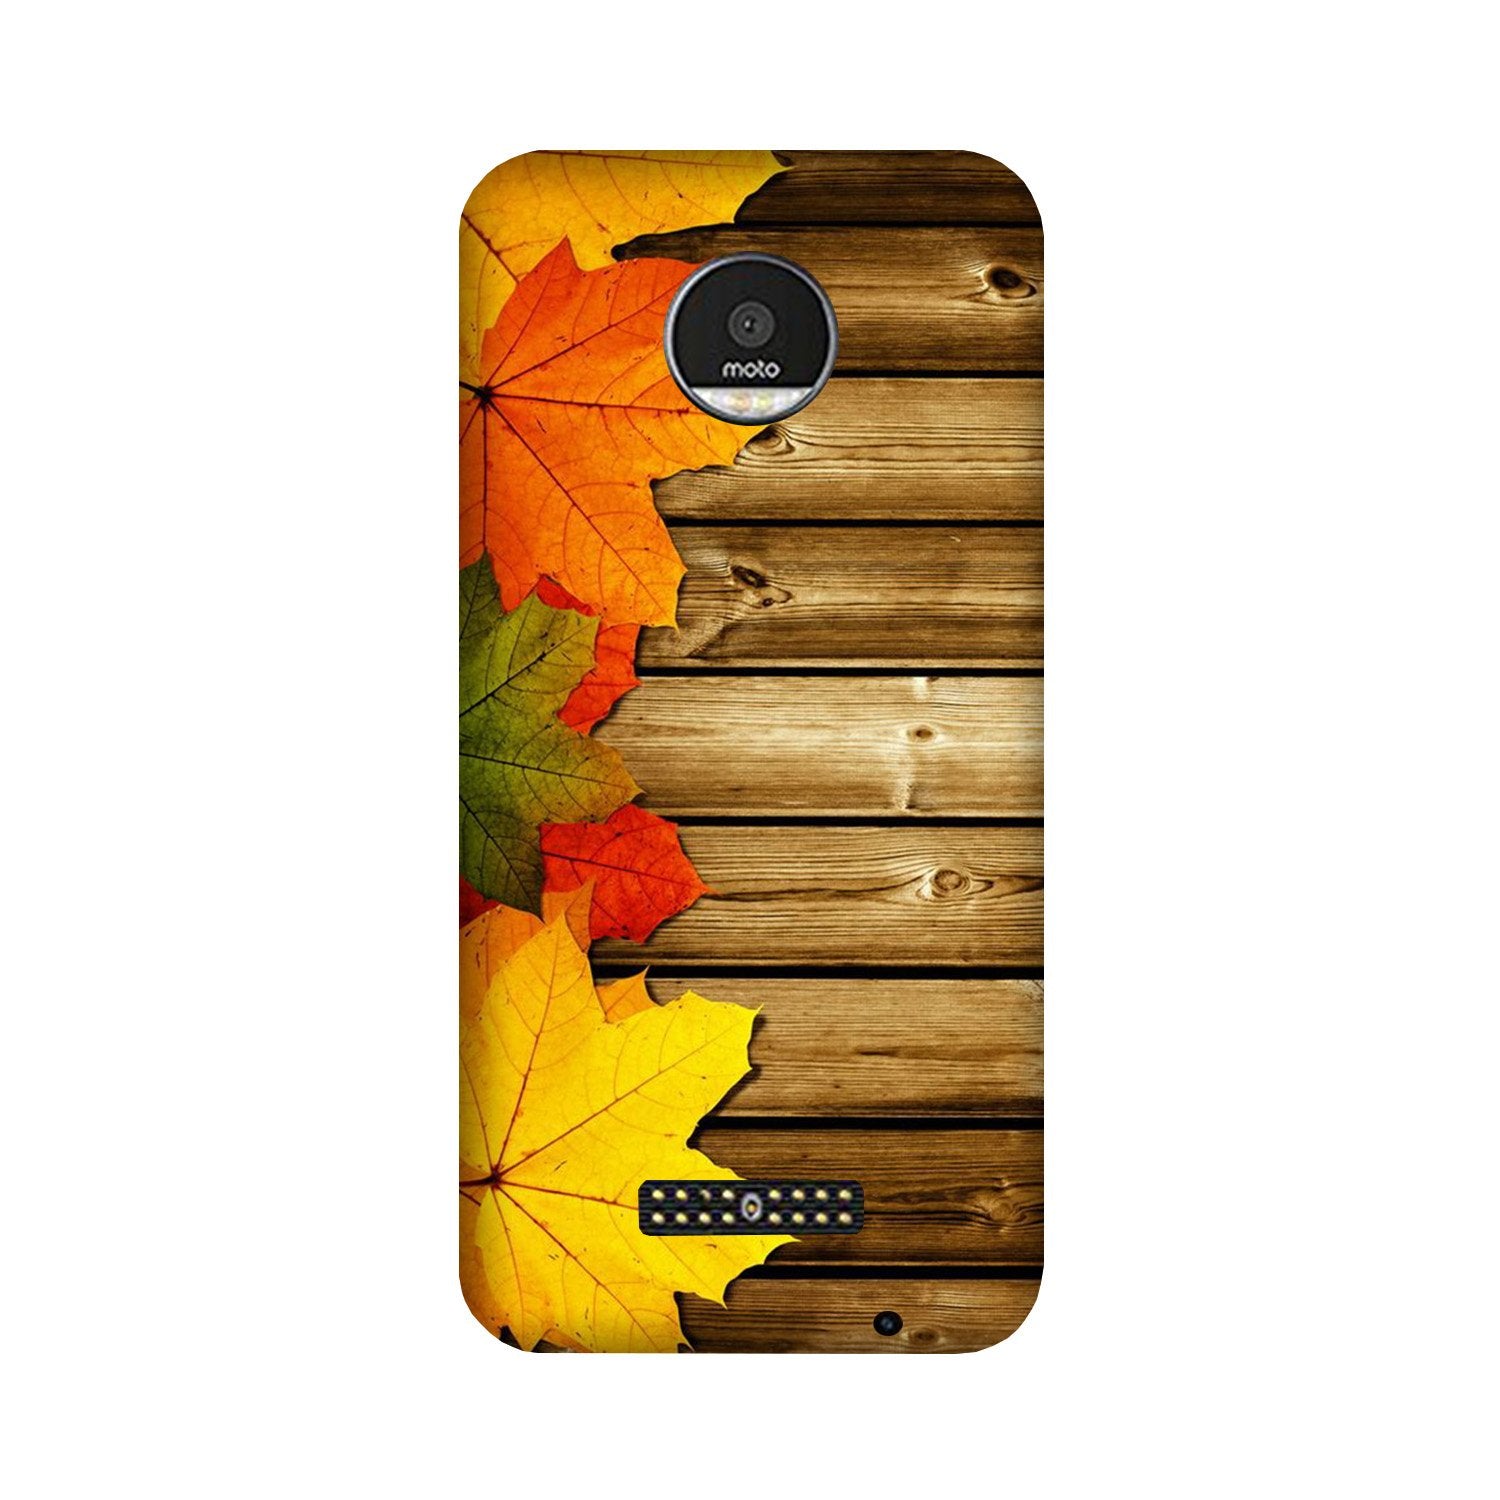 Wooden look3 Case for Moto Z2 Play